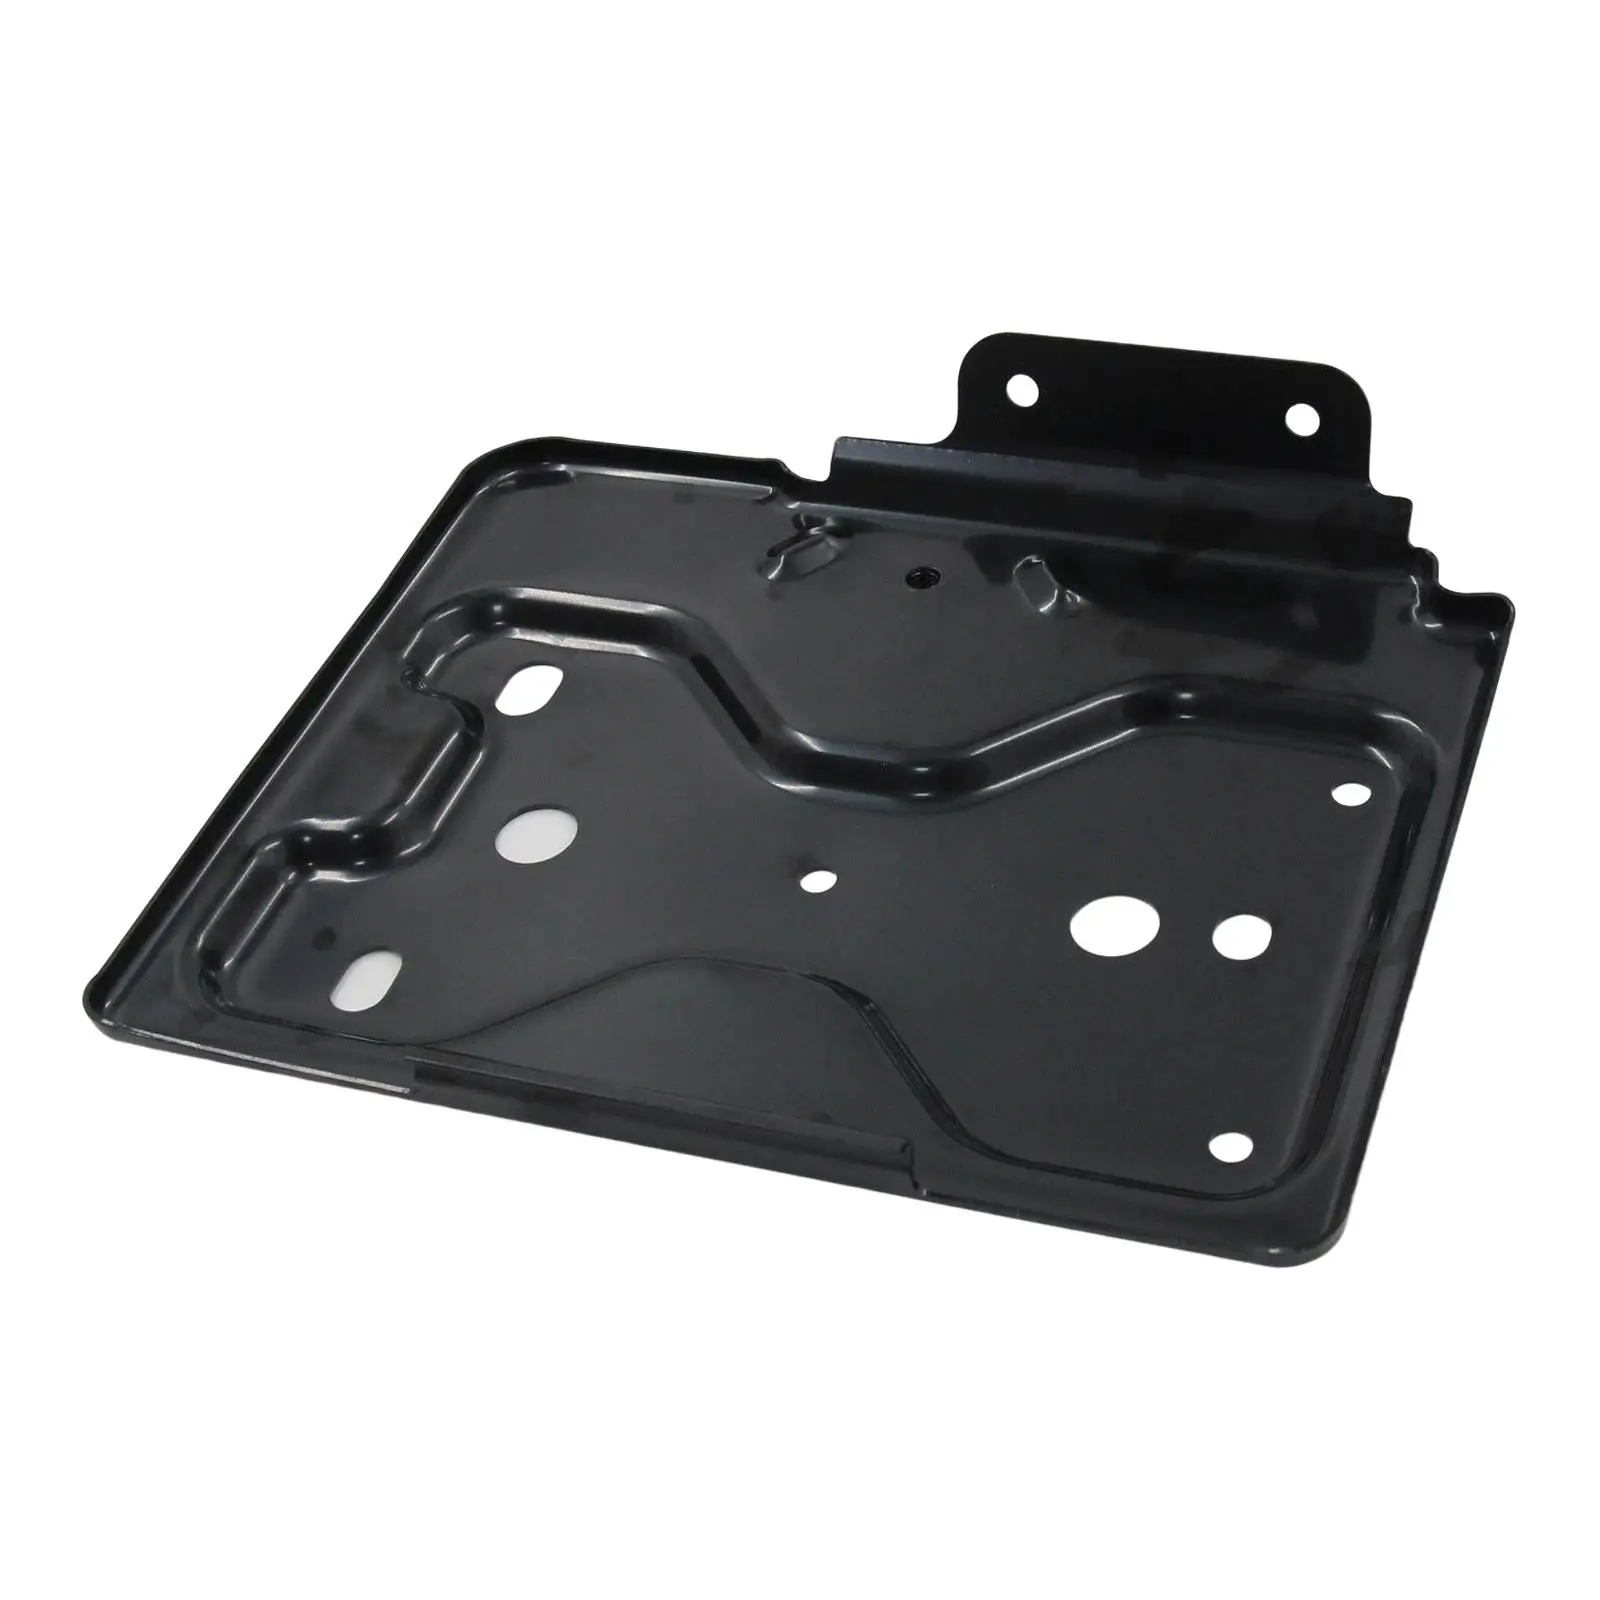 Driver Side Battery Tray Durable High Performance Easy to Install Premium Replaces Spare Parts for Chevrolet Silverado 1500